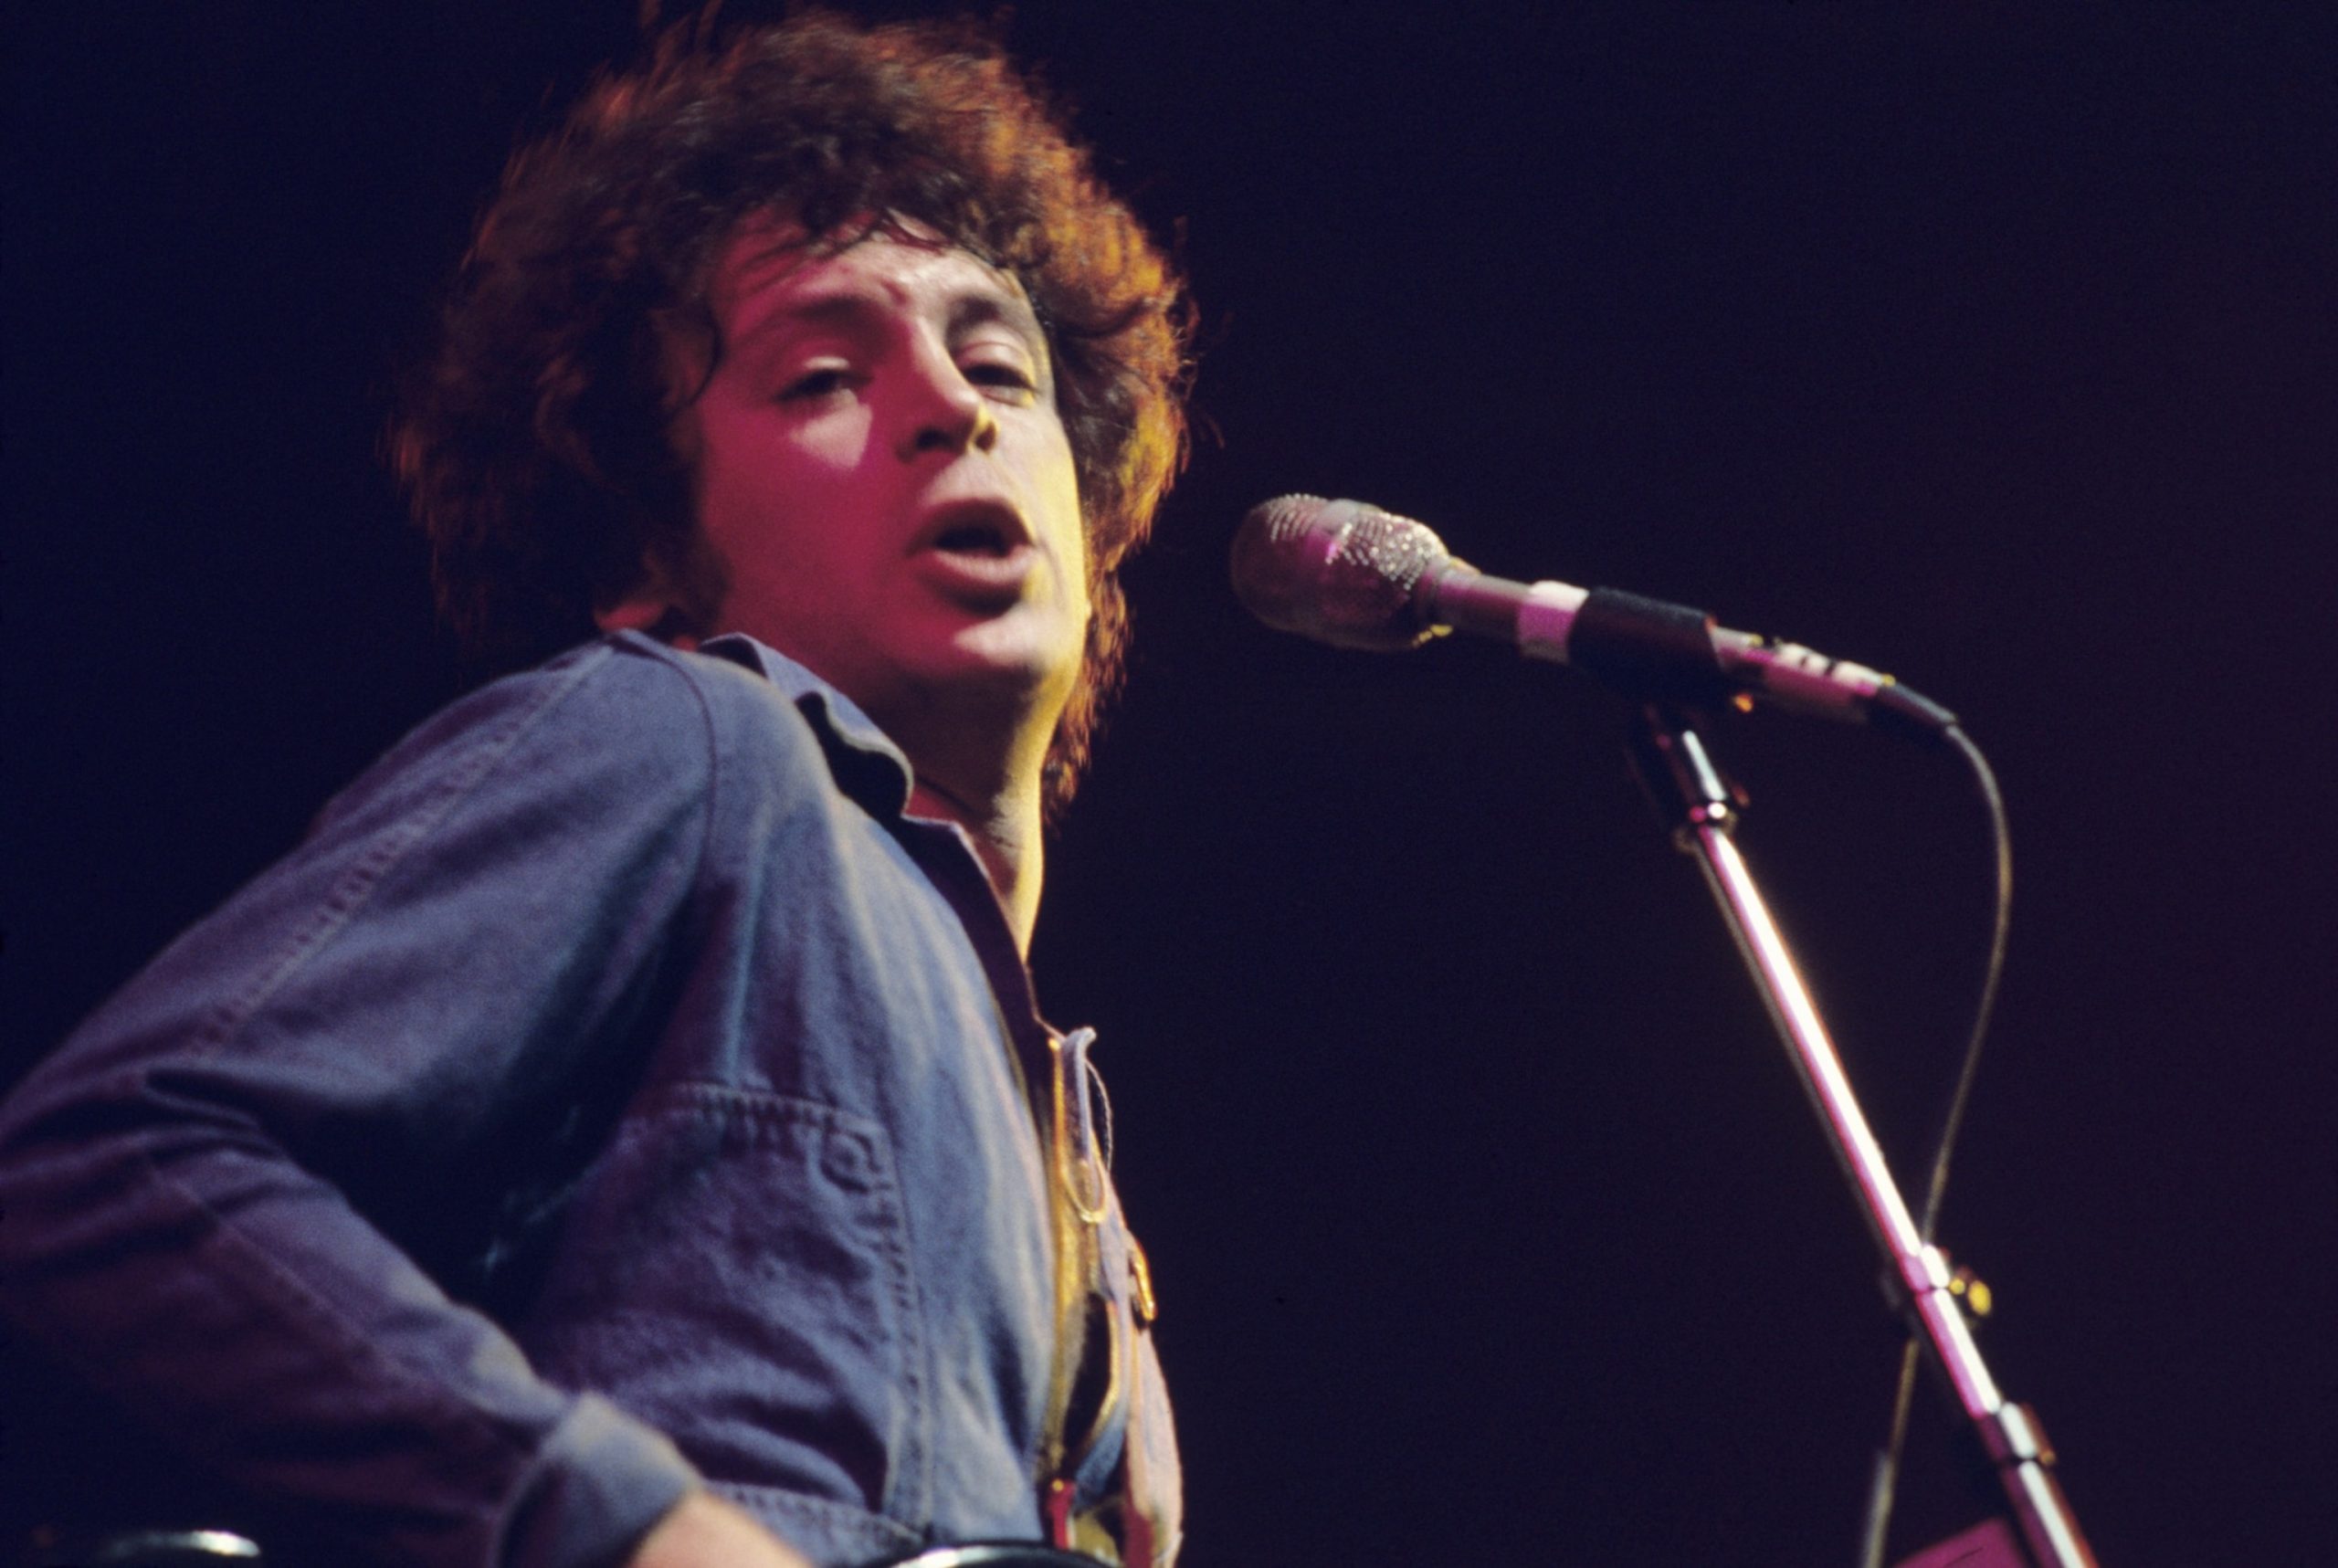 Singer Eric Carmen, known for 'All by Myself,' passes away at age 74